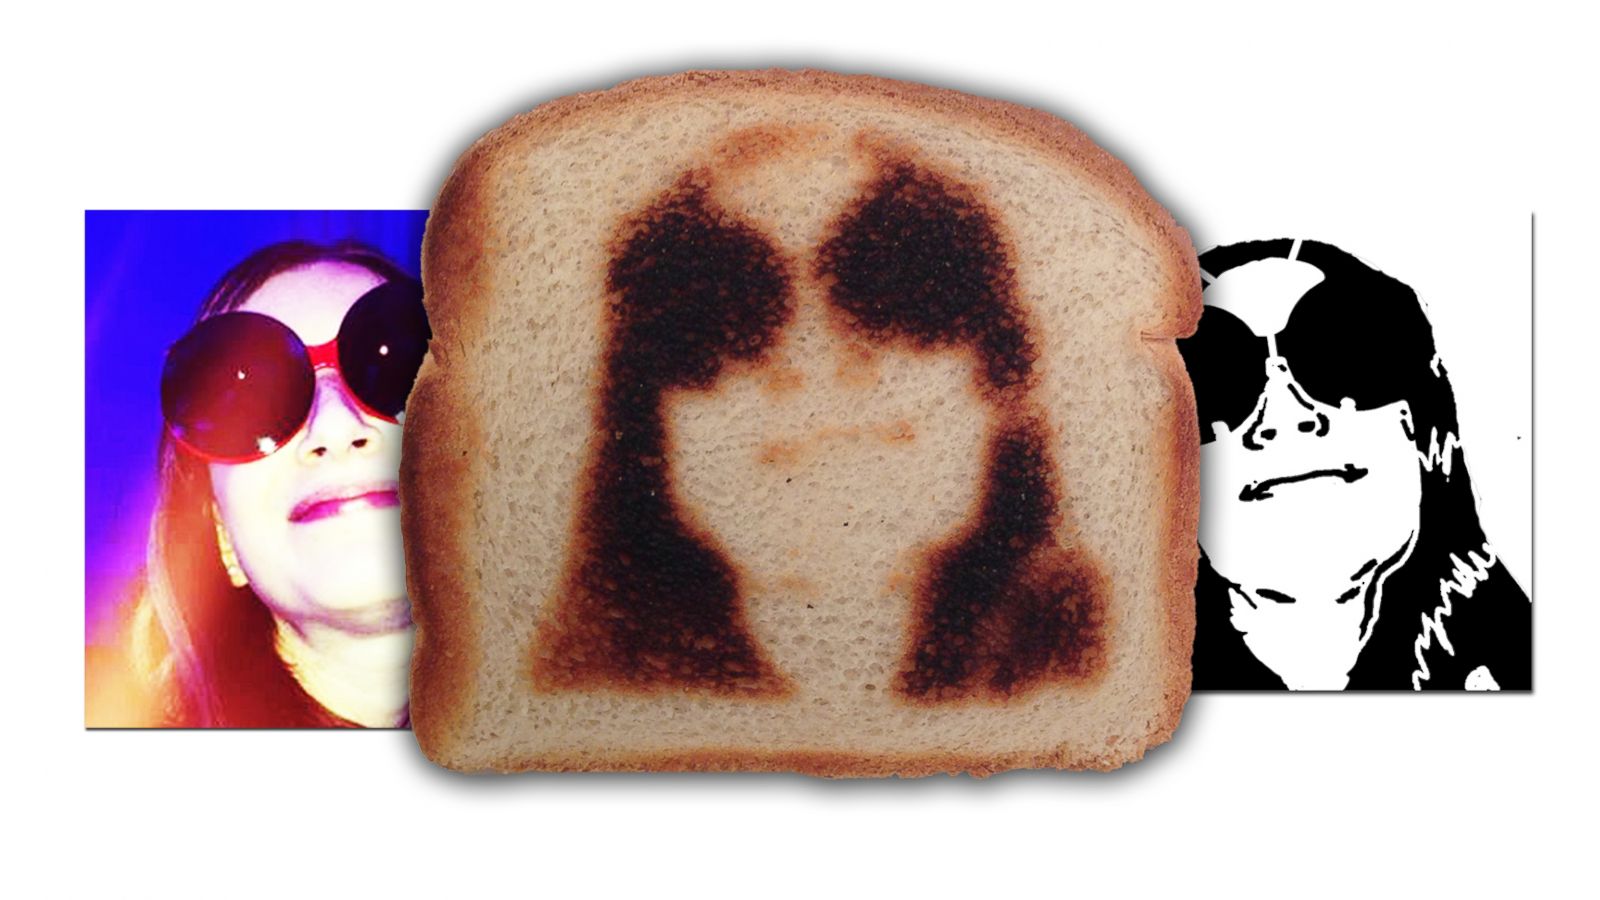 Make Your Own Selfies on Bread with a $75 Custom Toaster